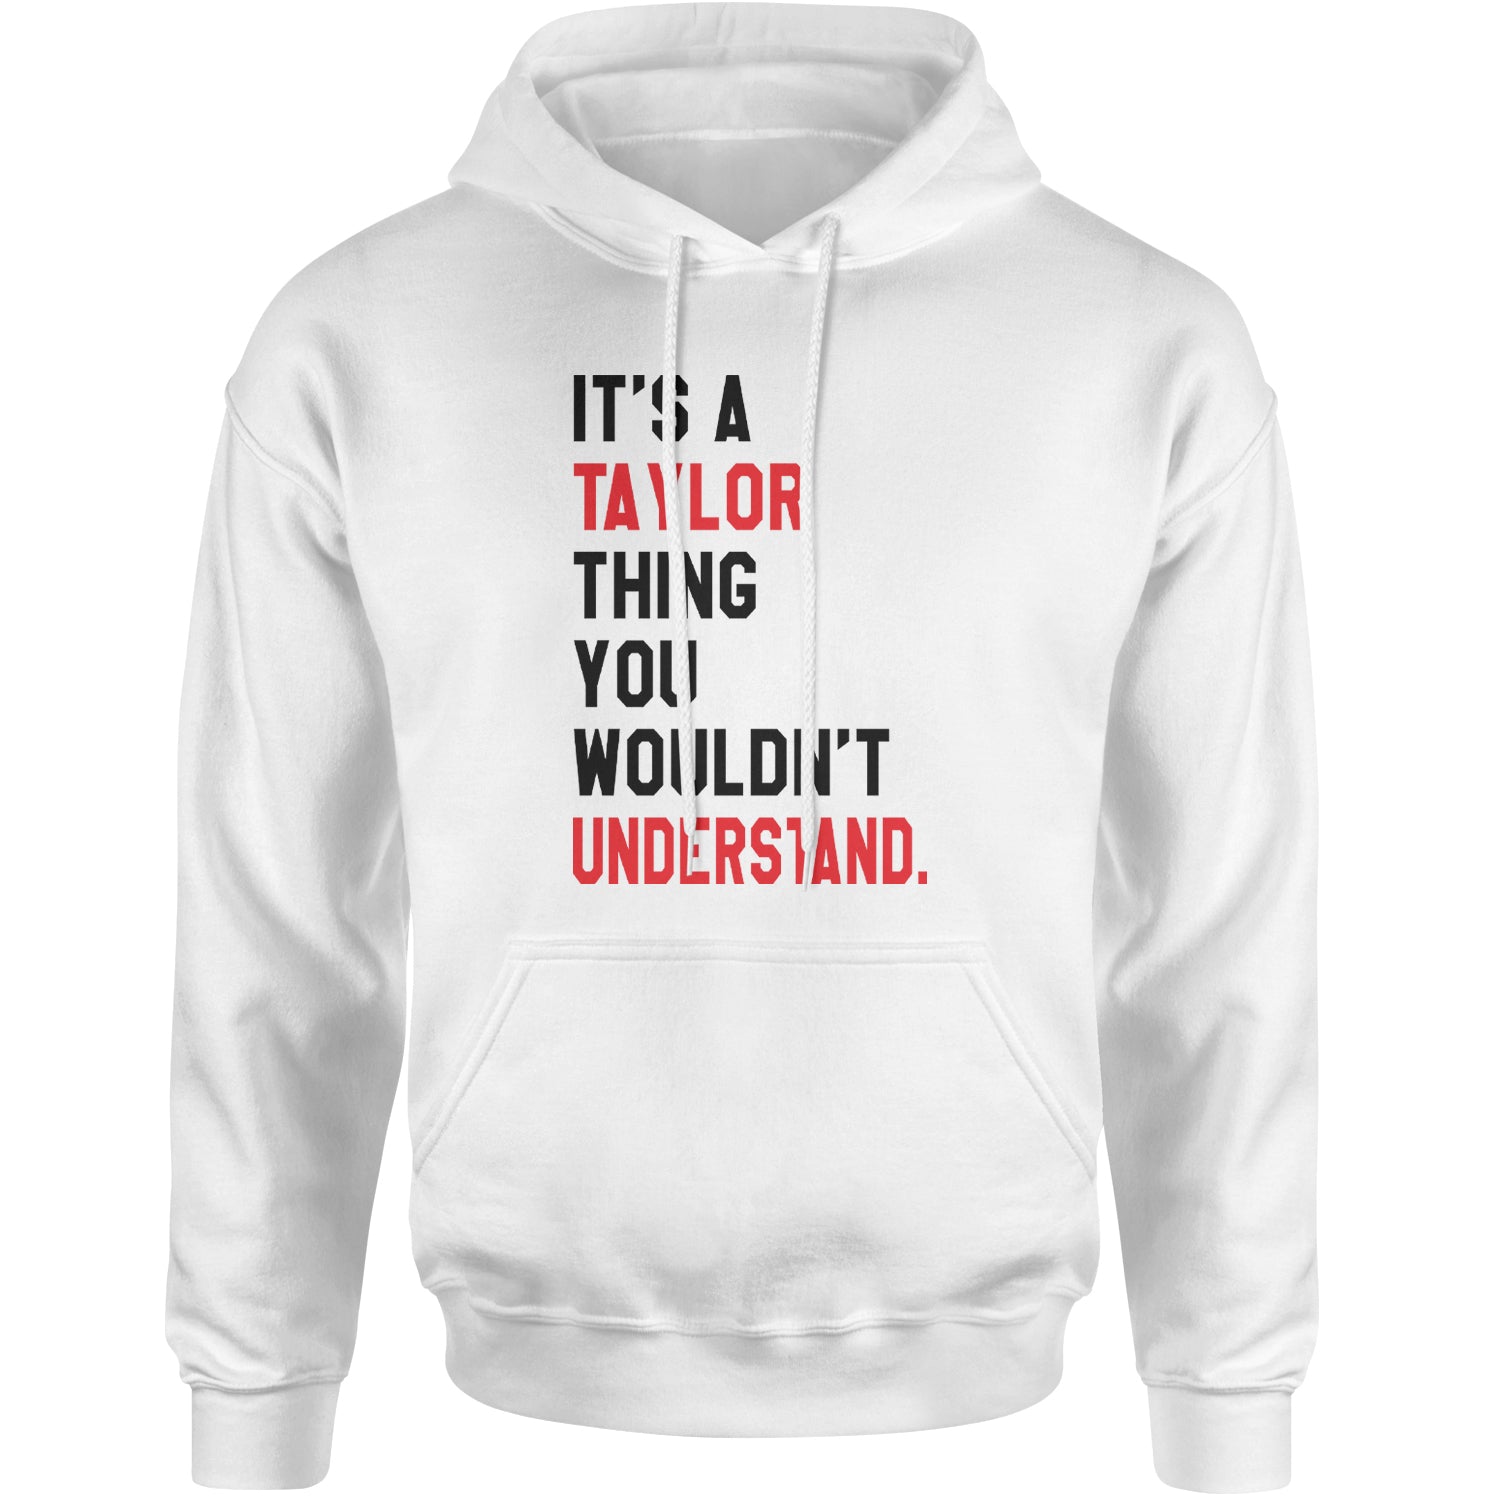 You Wouldn't Understand It's A Taylor Thing TTPD Adult Hoodie Sweatshirt